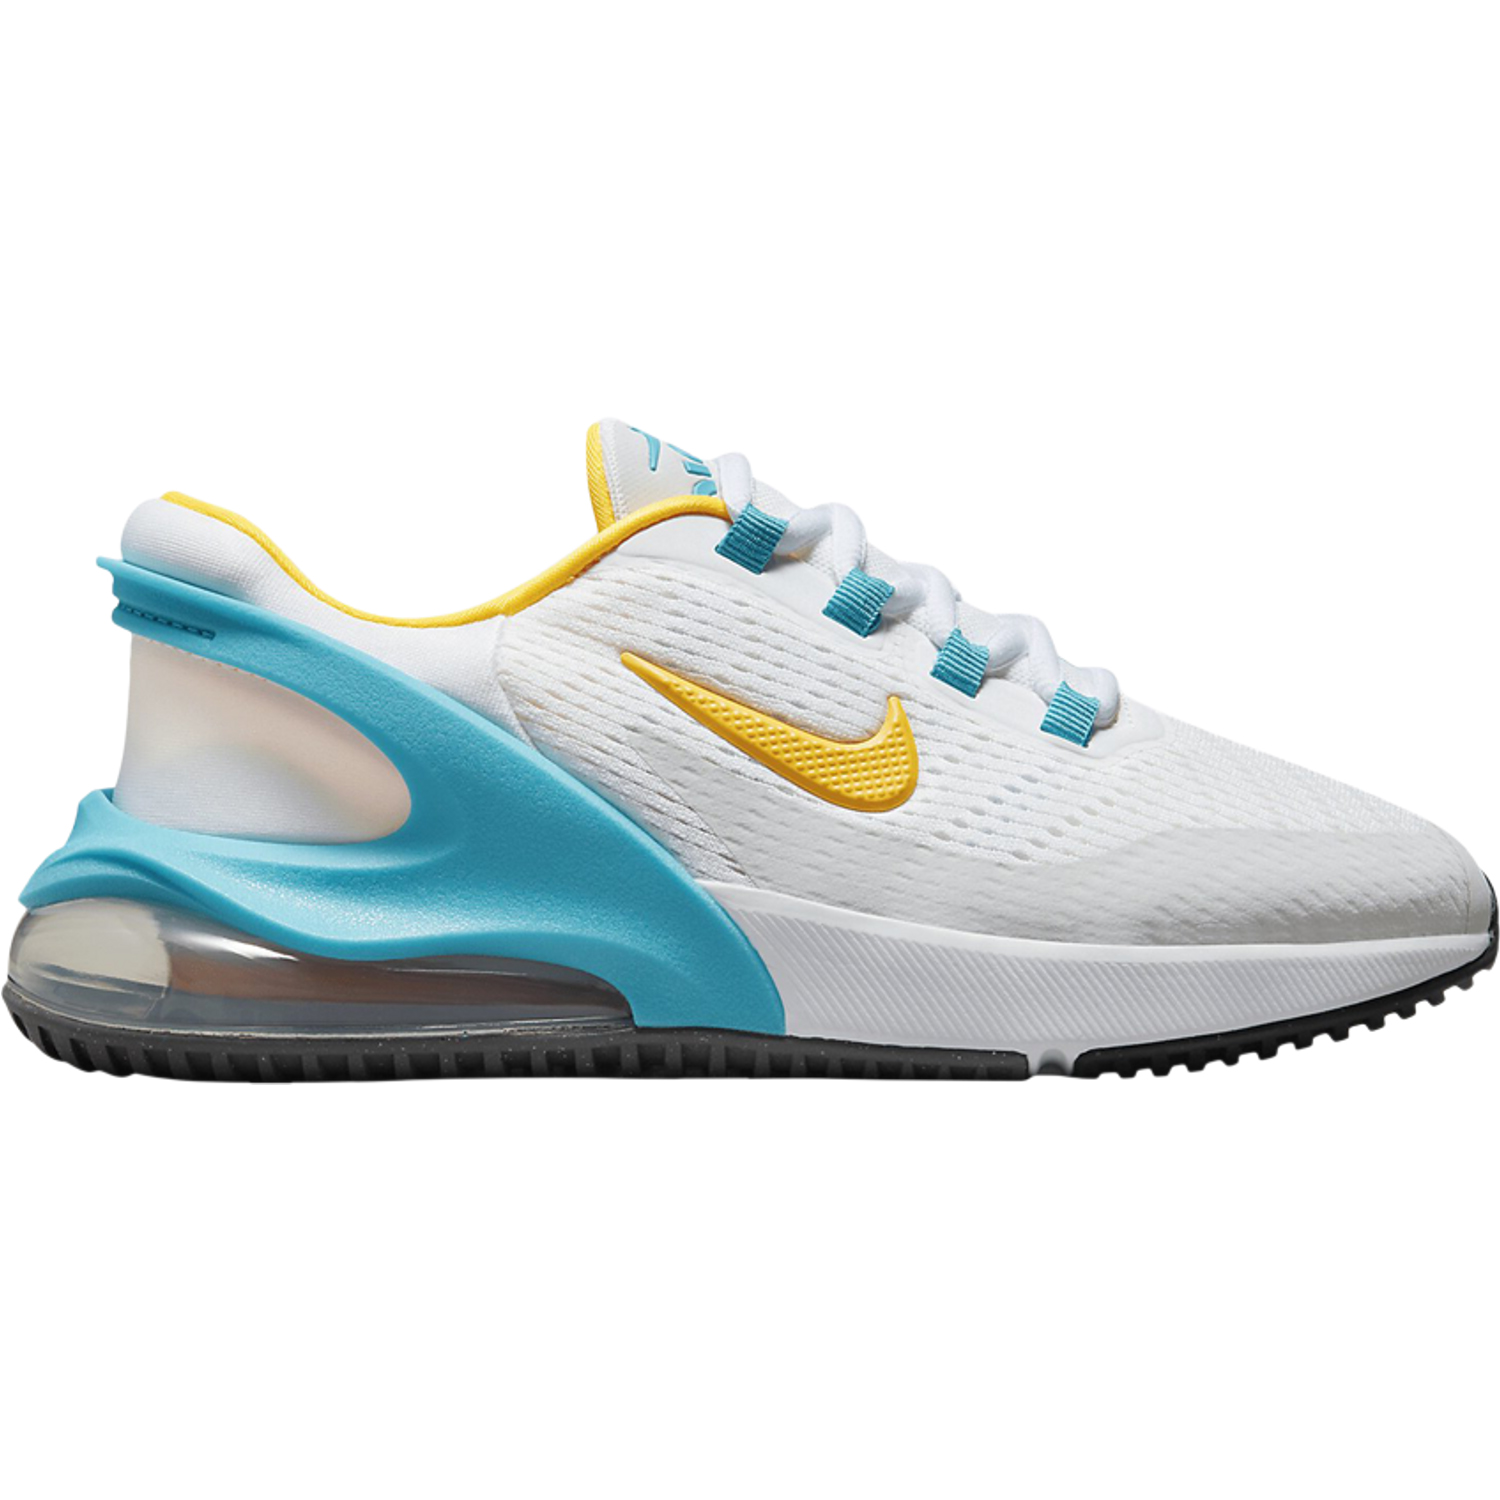 Кроссовки Nike Air Max 270 GO GS, белый nike air max 270 men s sneakers size 40 45 cn7078 071